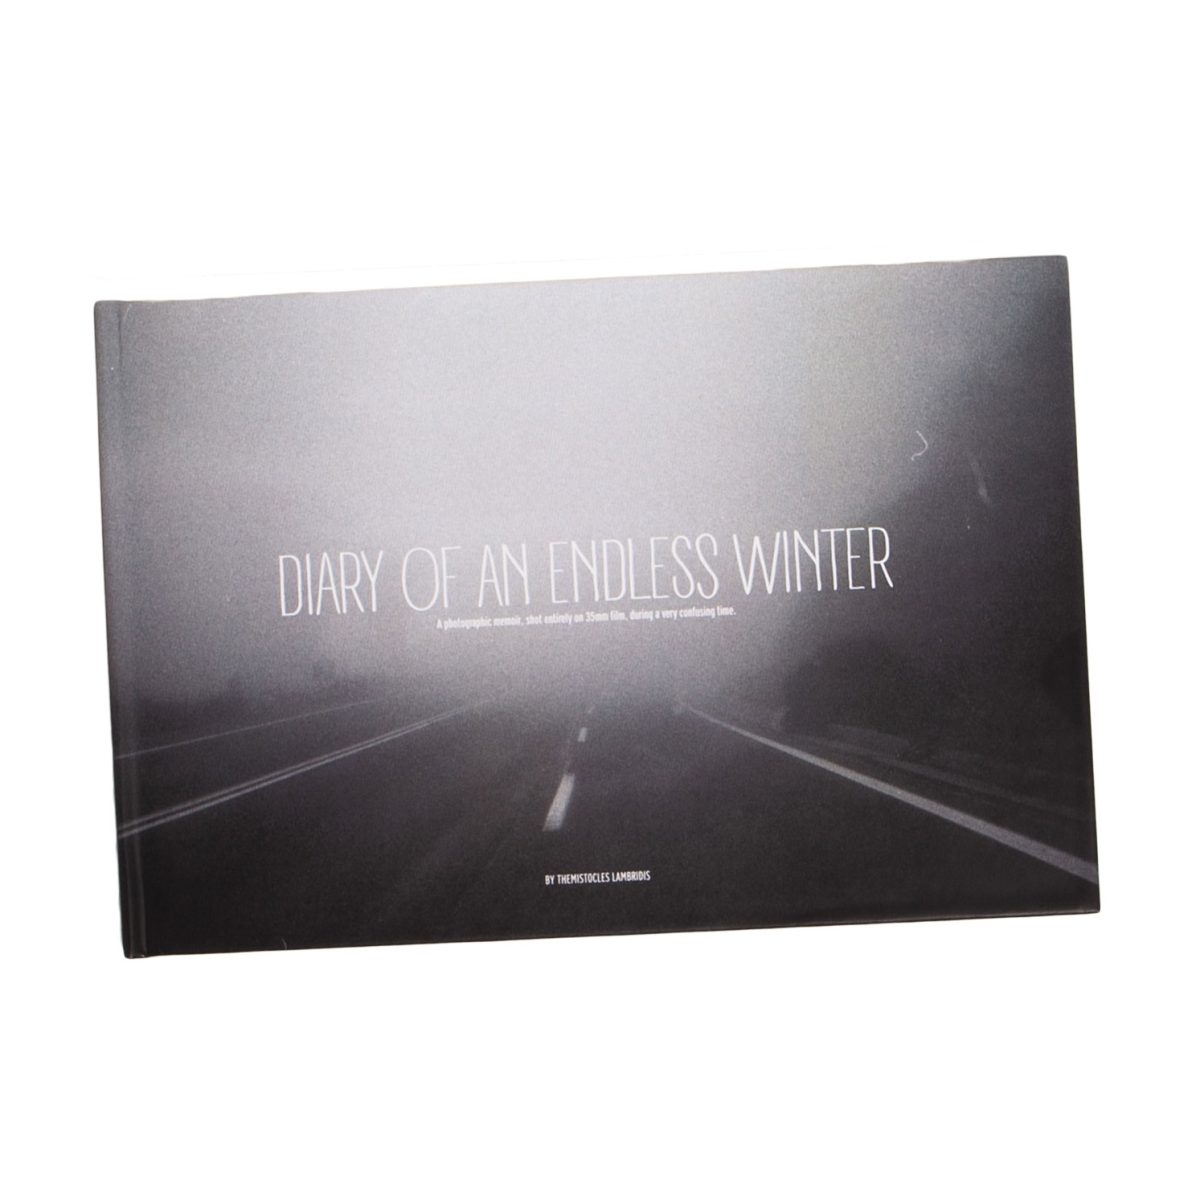 DIARY OF AN ENDLESS WINTER – Photo Book